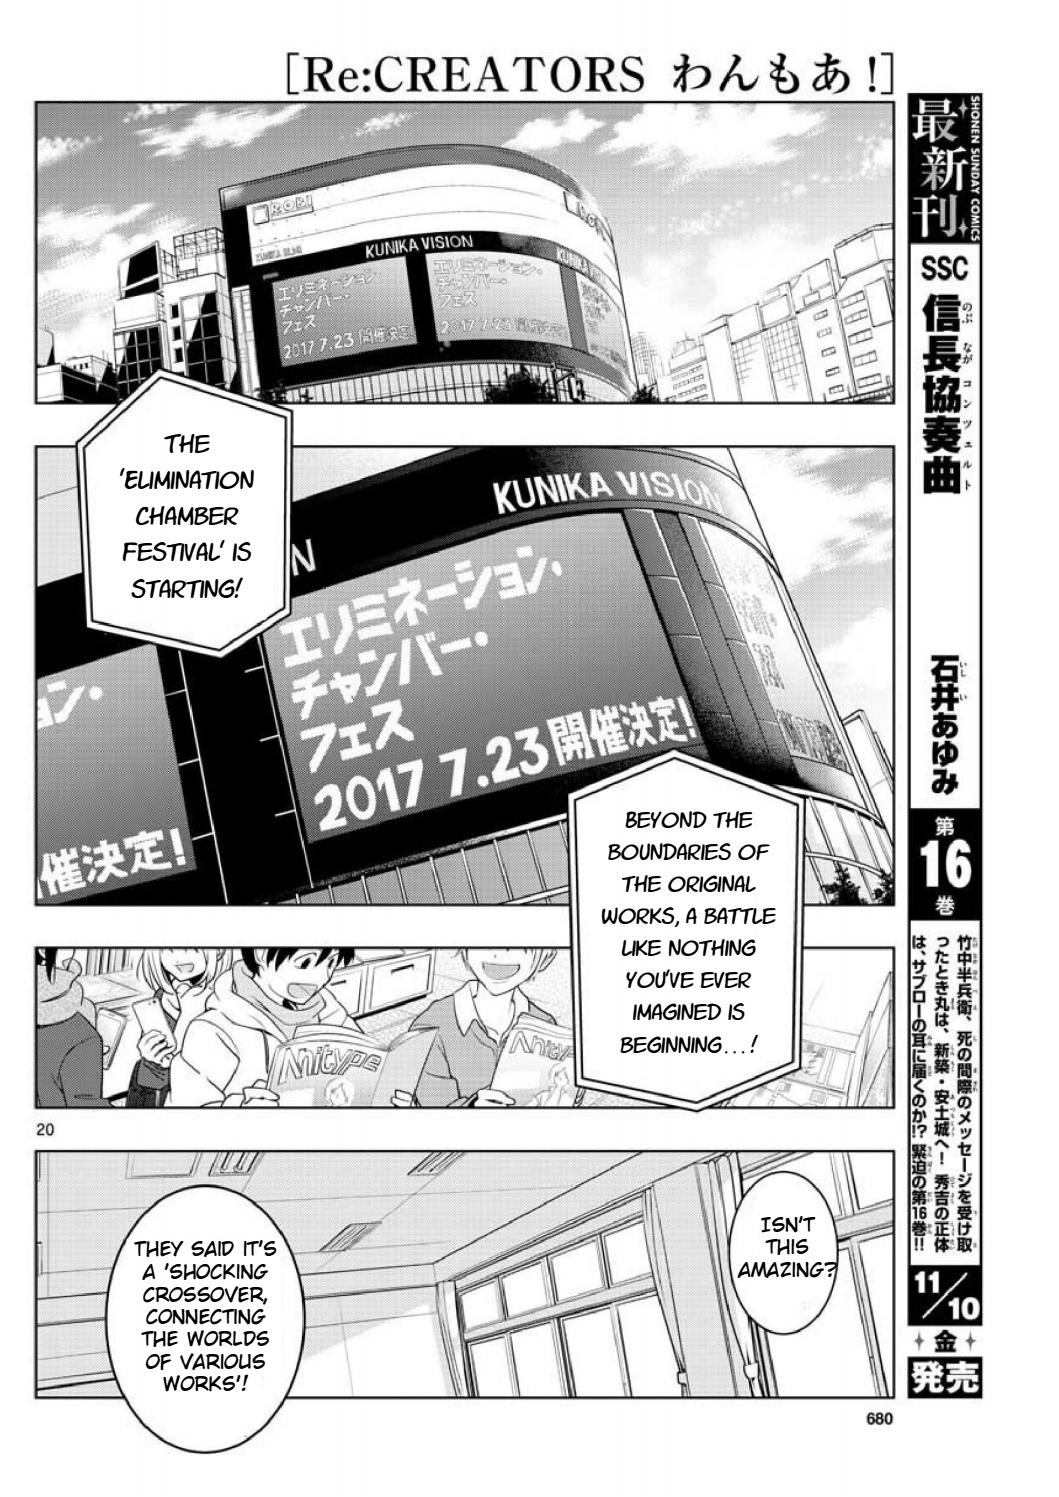 Re:creators One More Chapter 5 #18